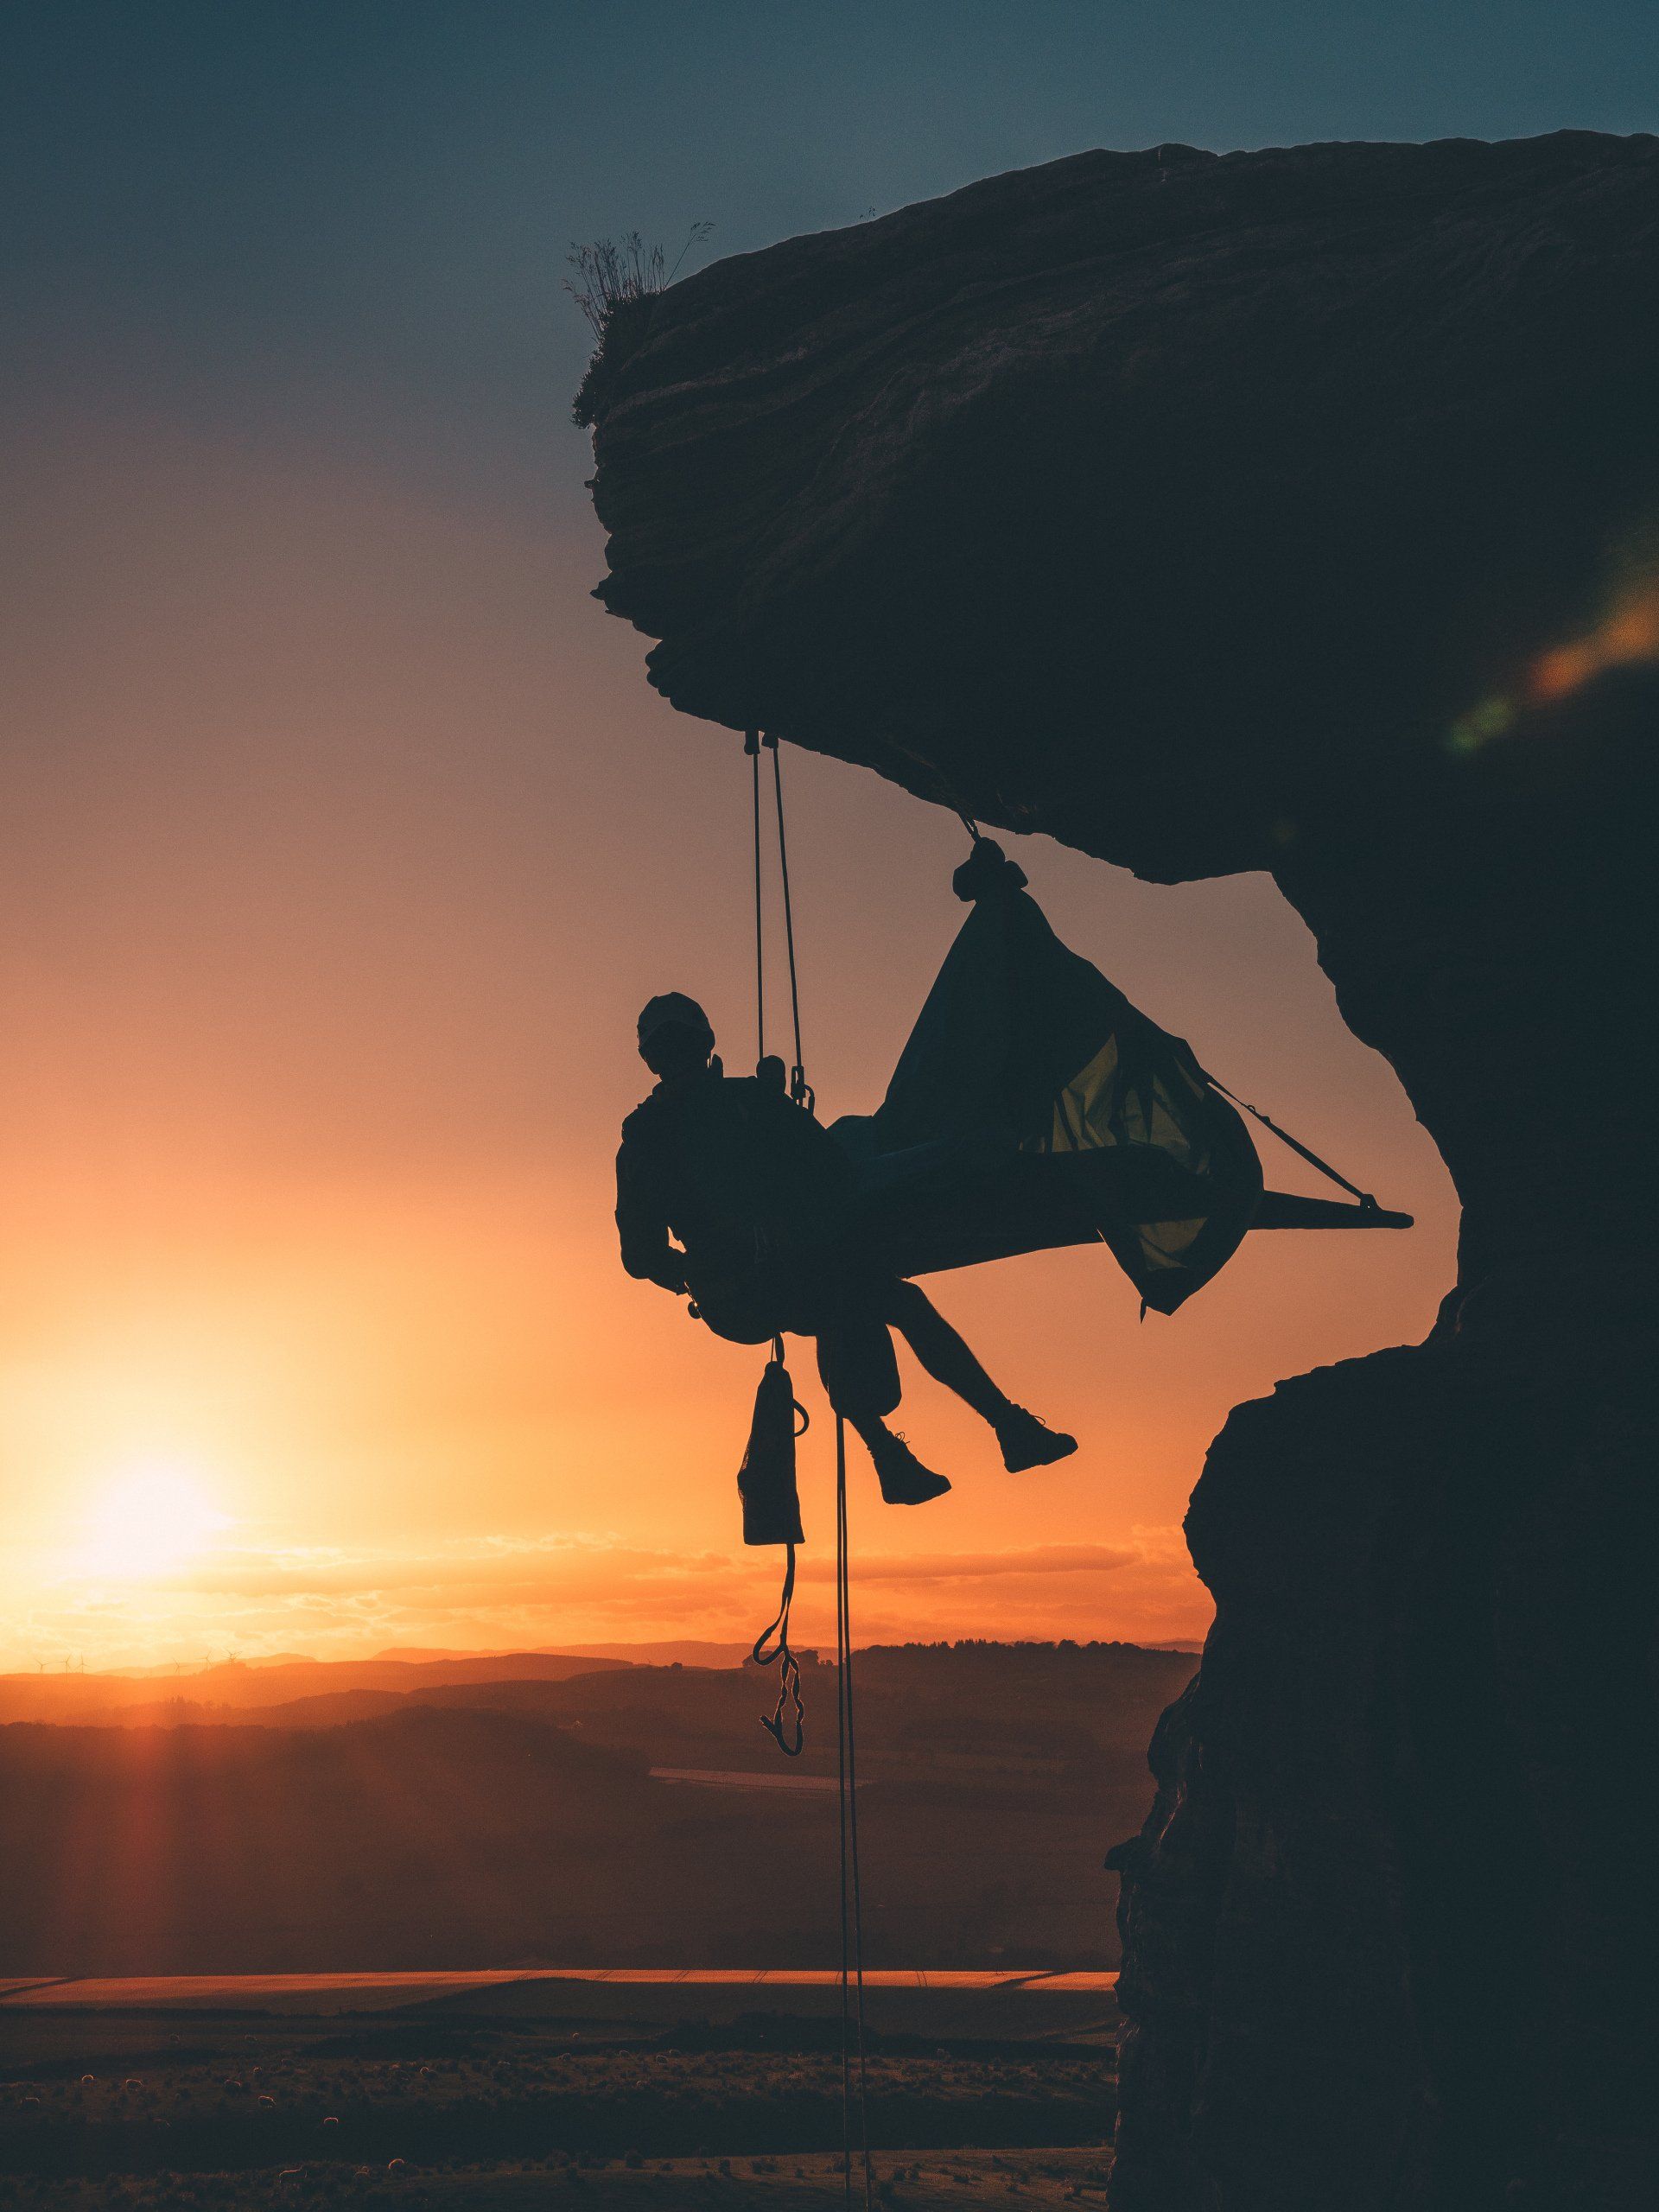 a person is sitting in a tent on a cliff at sunset with a rescue worker using ropes to access.